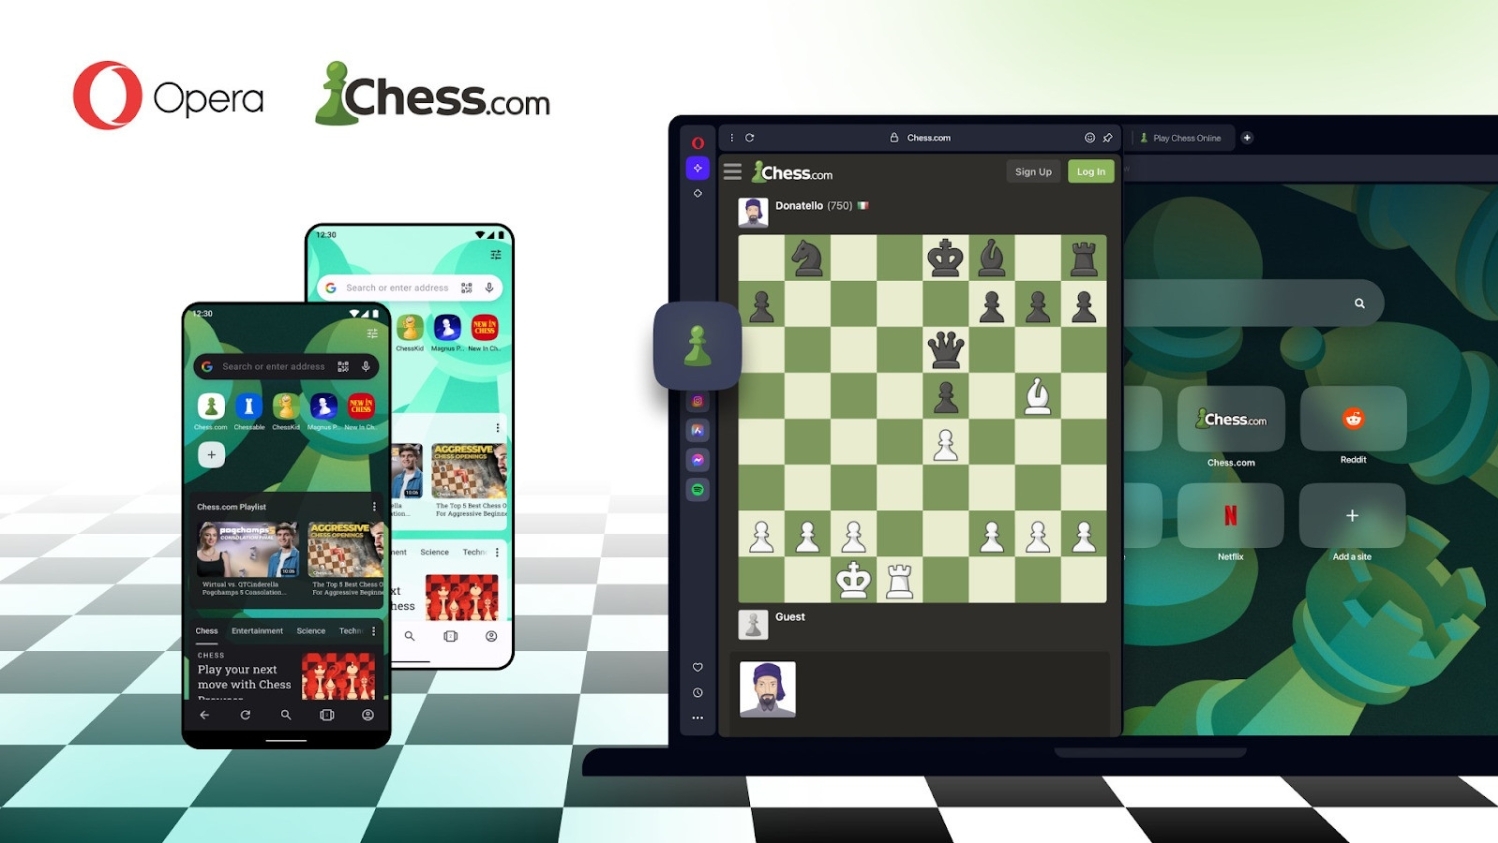 Chess.com servers struggle to keep up with demand as chess